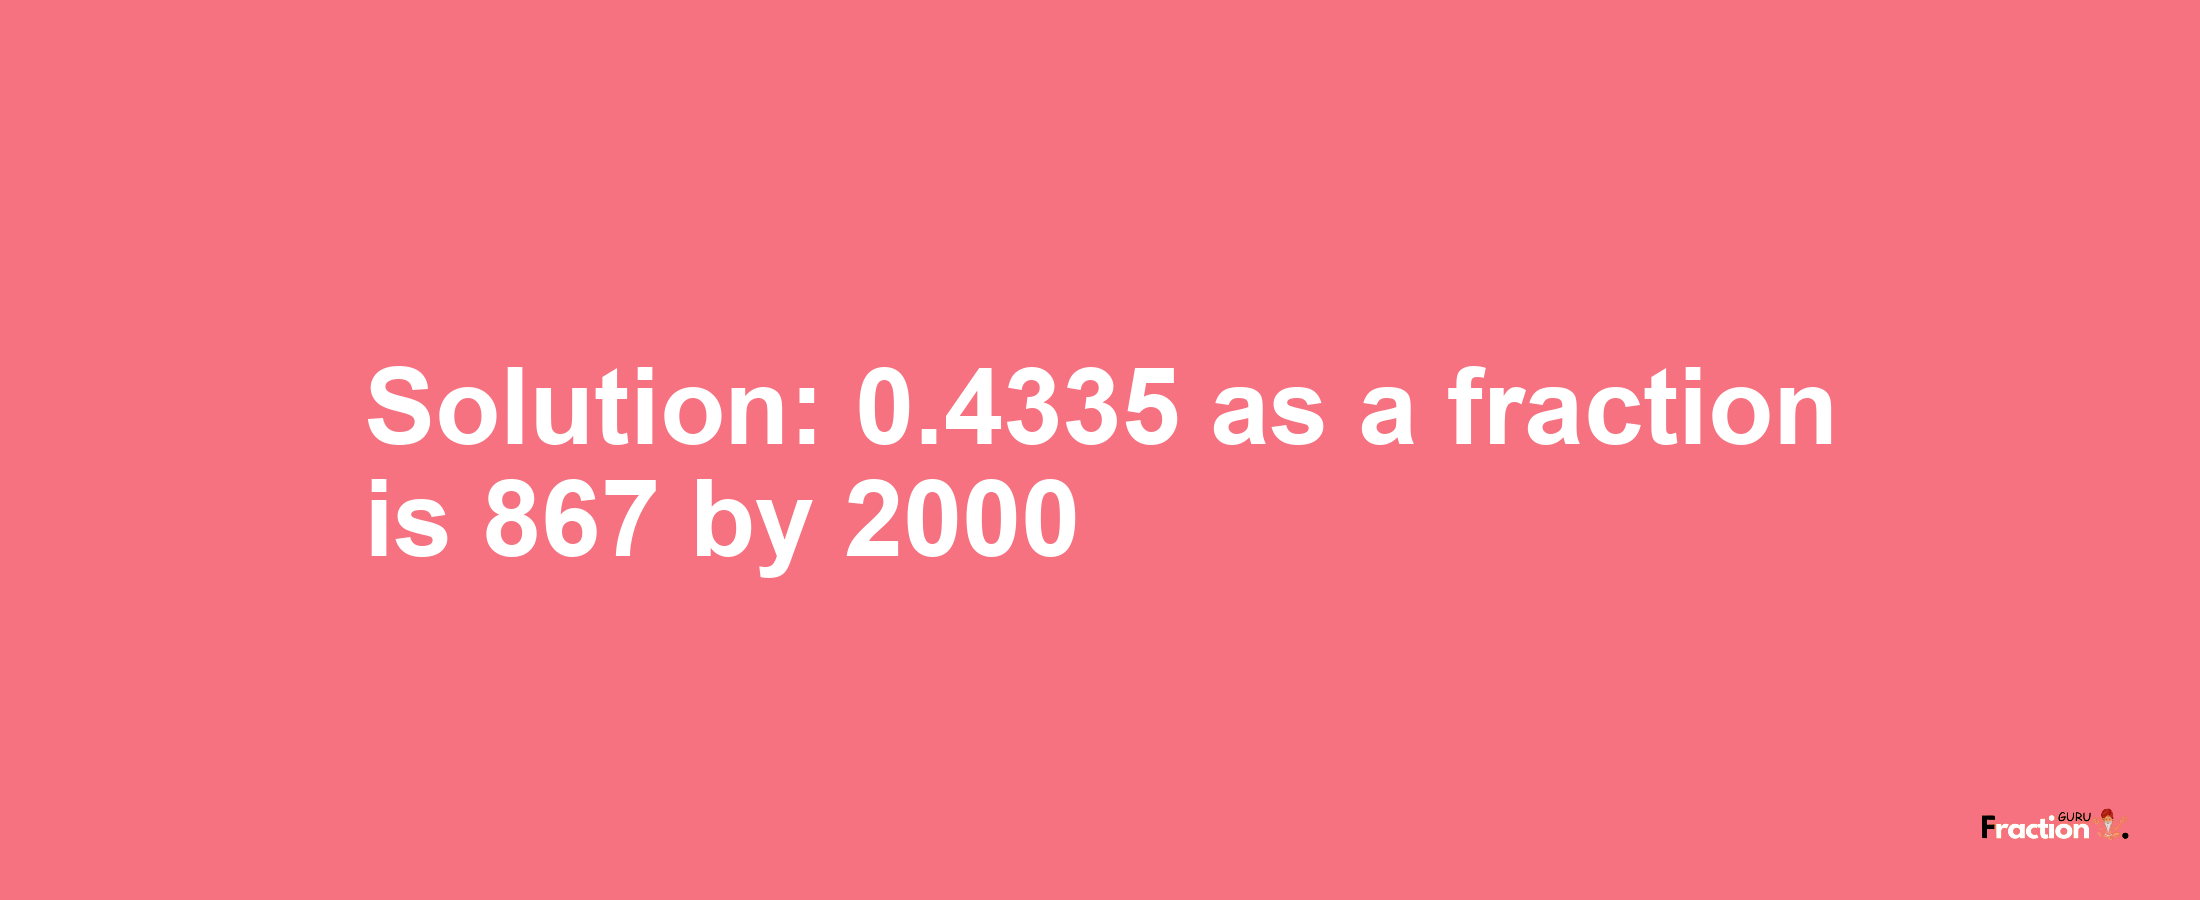 Solution:0.4335 as a fraction is 867/2000